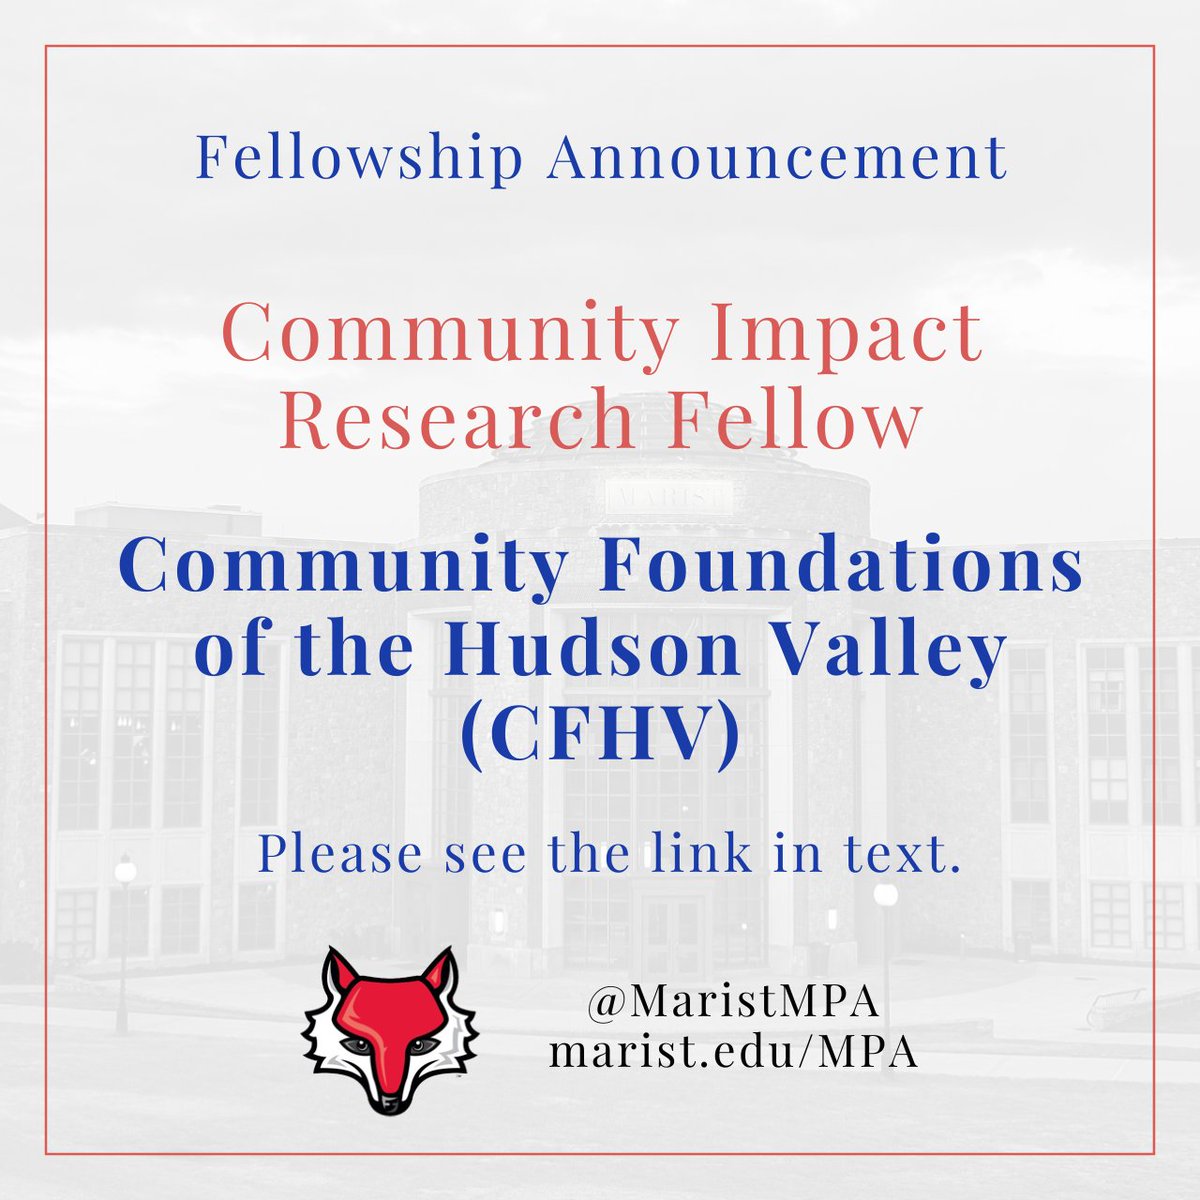 The Community Foundation of the Hudson Valley is actively recruiting for a Community Impact Research Fellowship position. More information can be found here: drive.google.com/file/d/1YDvRHj…